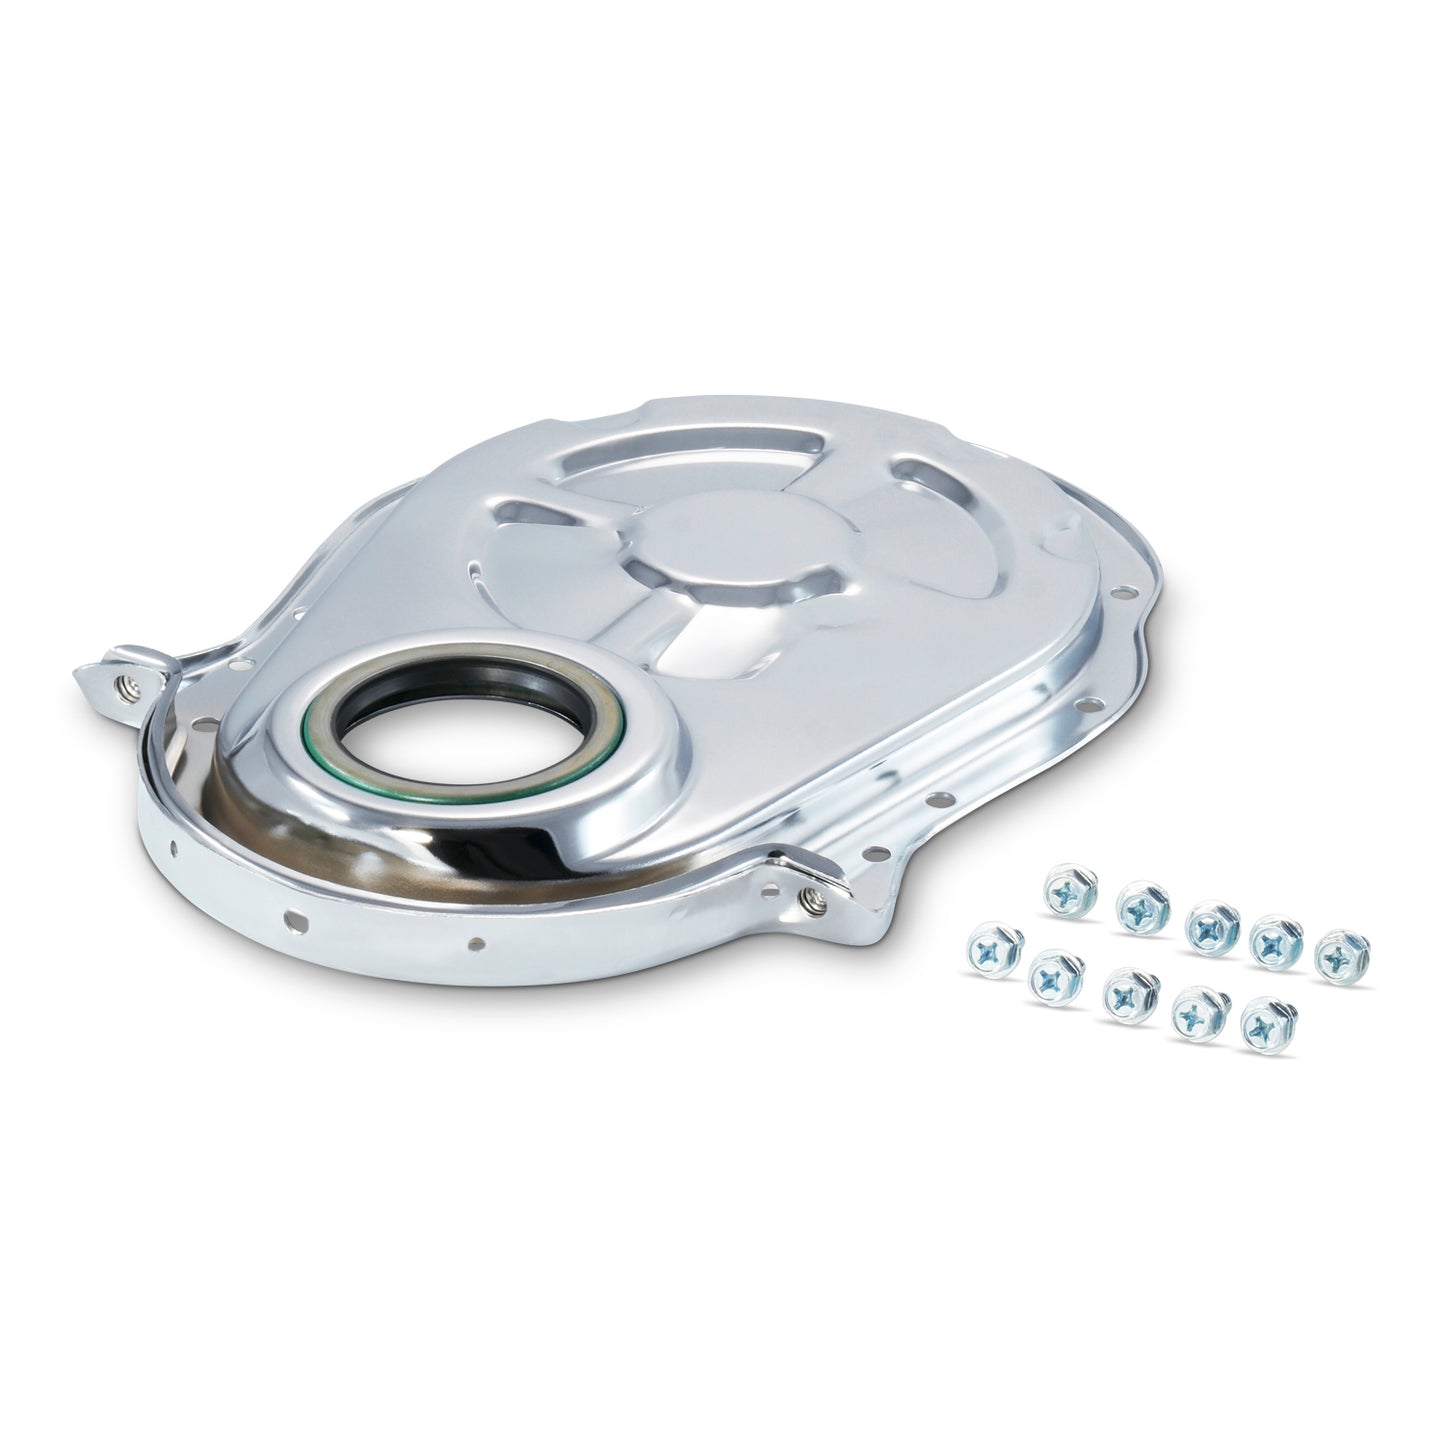 Proform Engine Timing Chain Cover; Chrome; Steel; Fit BB Chevy; Crankshaft Seal Included 66153